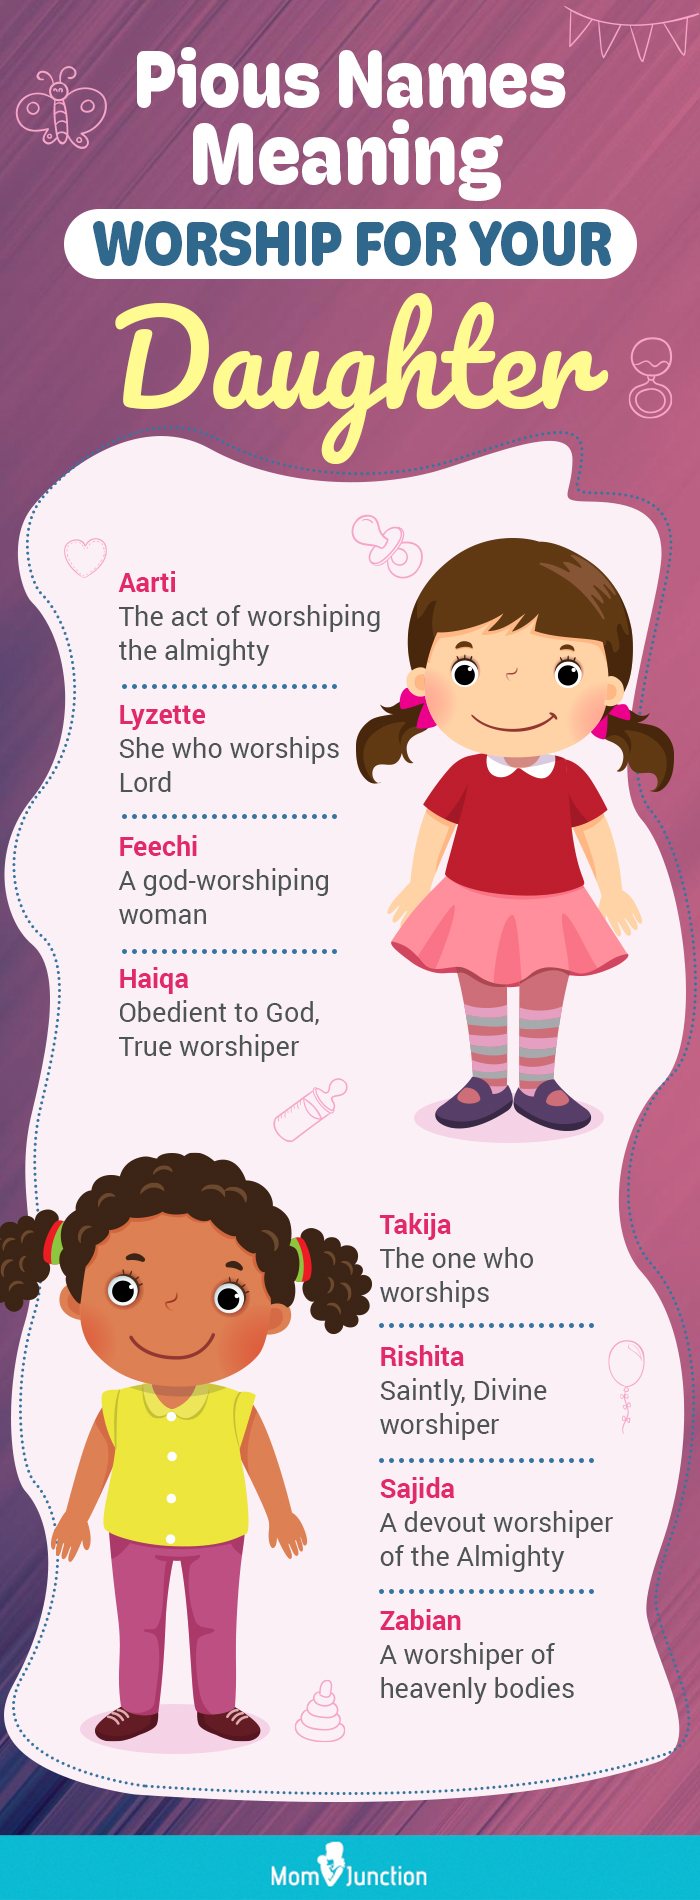 pious names meaning worship for your daughter (infographic)